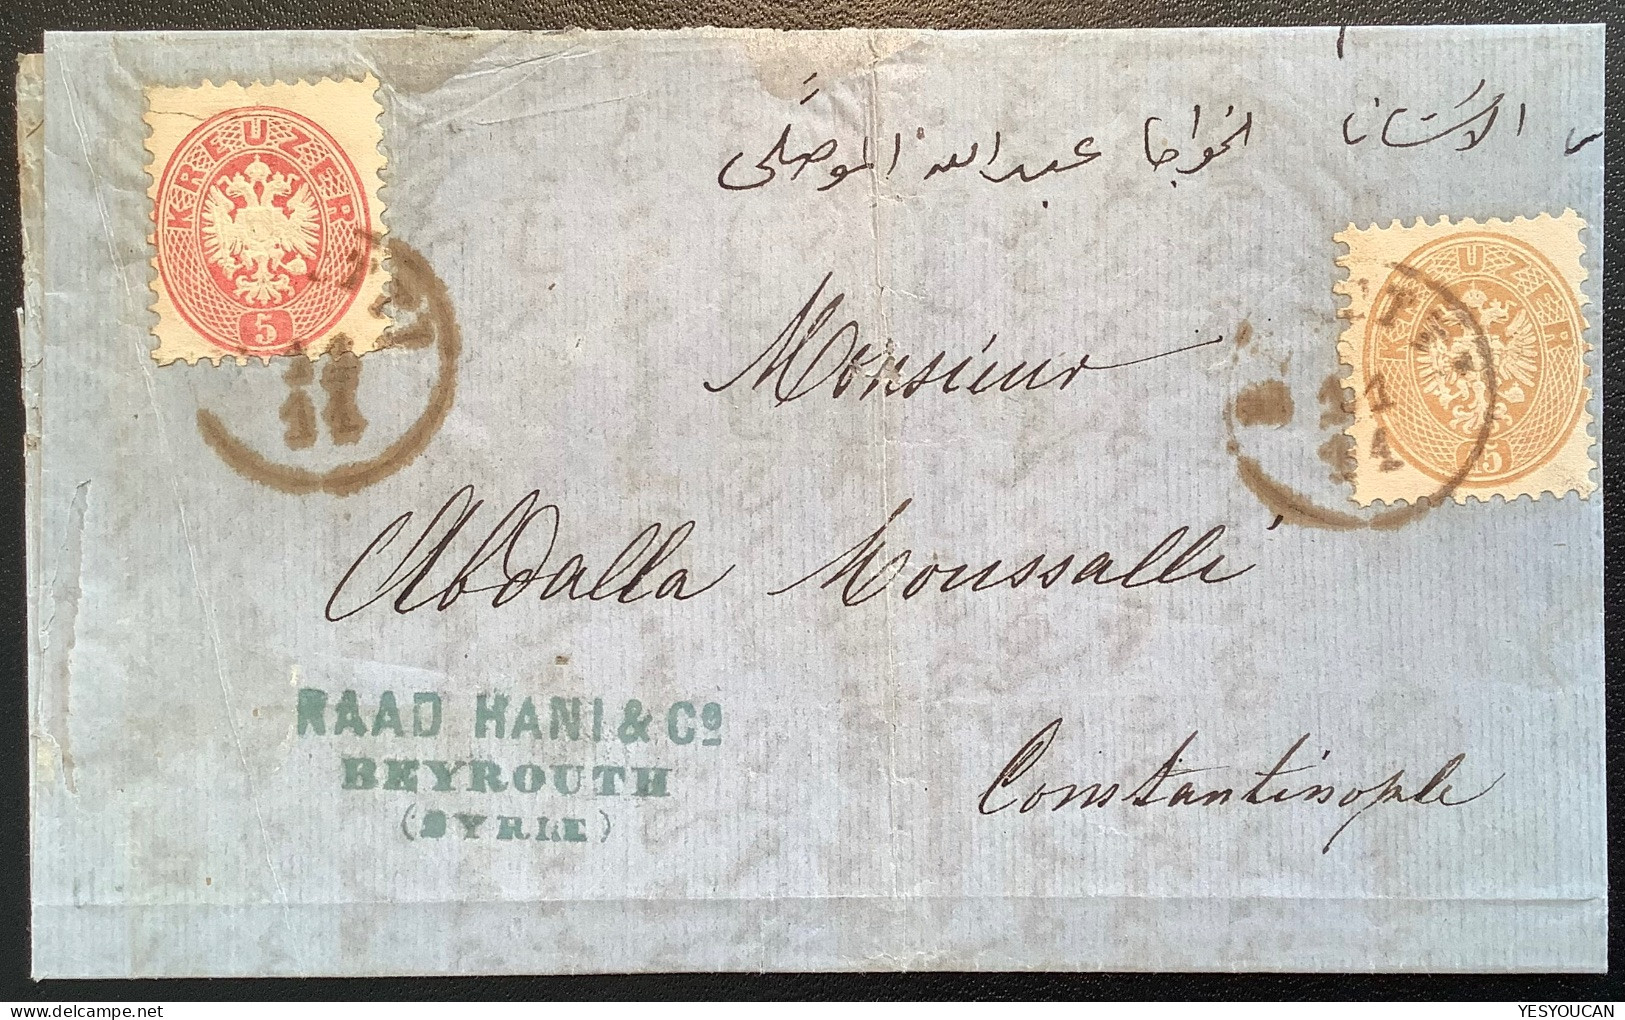 BERUTTI 1864: UNIQUE ! KREUZER STAMPS USED IN LEBANON (Beyrouth Syrie Liban Cover Lettre Österreichische Levante Levant - Eastern Austria